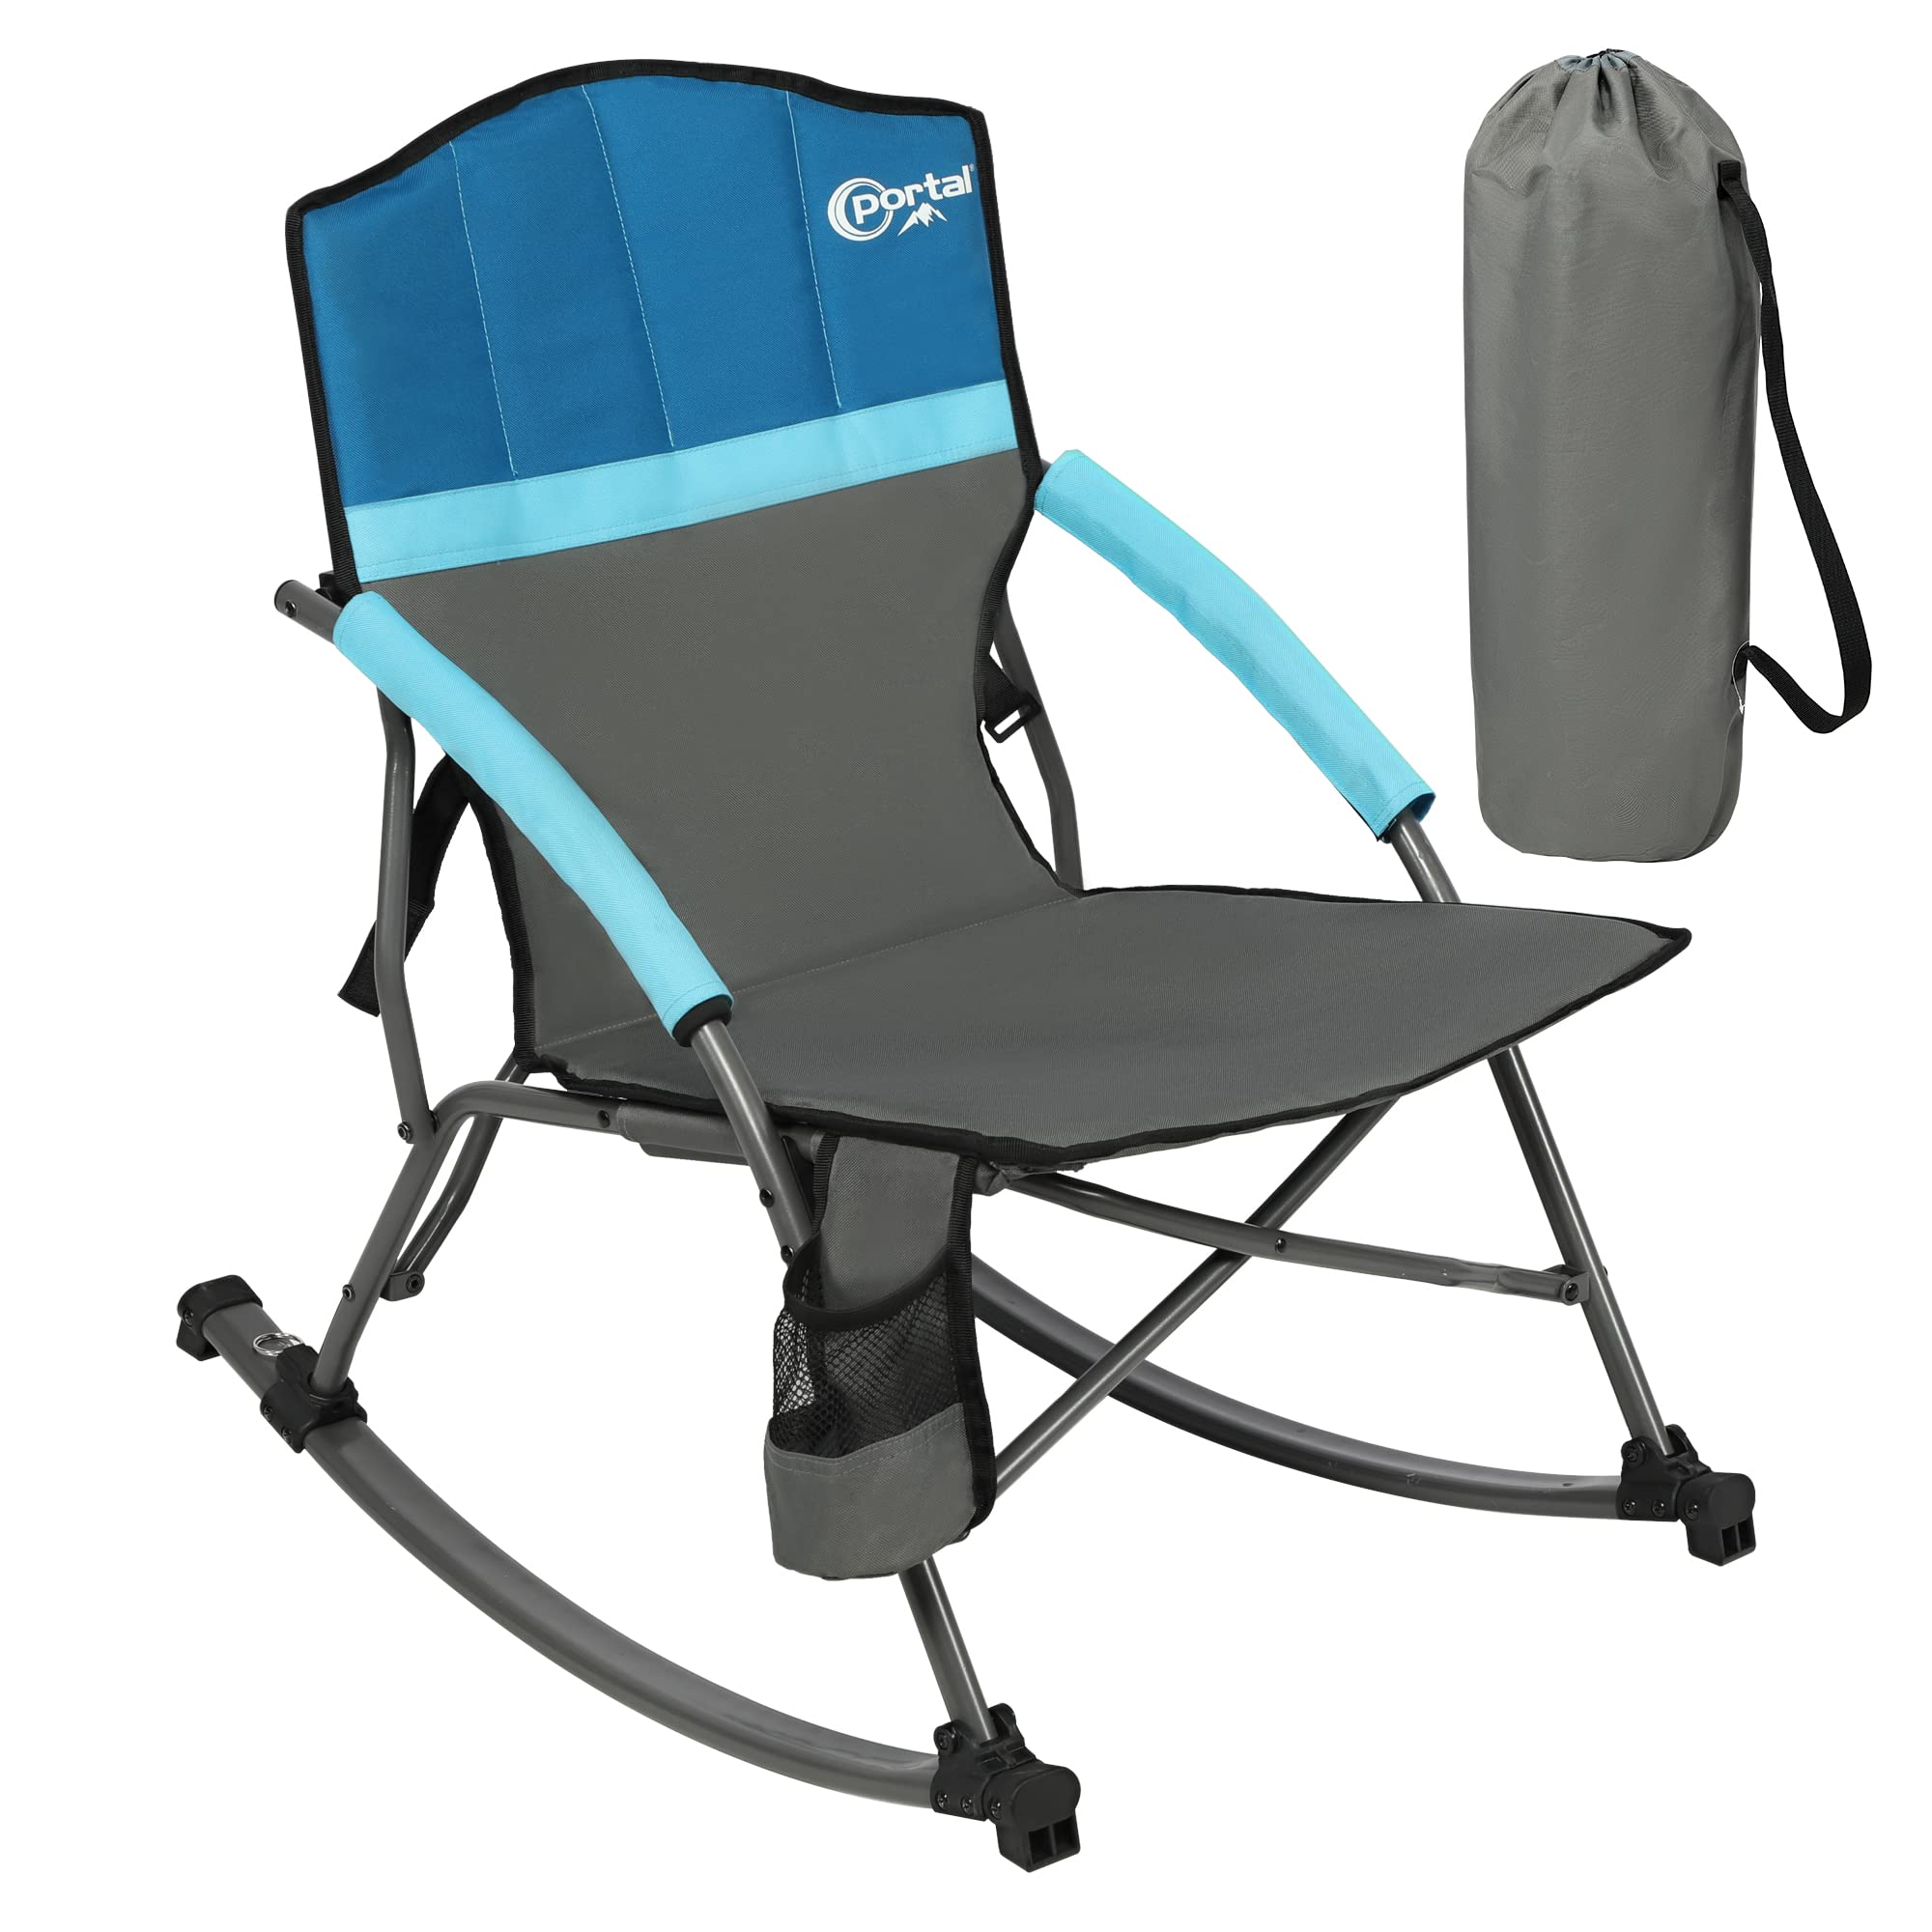 PORTAL Rocking Camping Chair Folding Portable Rocker Outdoor with Cup Holder for Patio, Lawn, Camp, RV, Support 300 lbs Grey Blue-lower